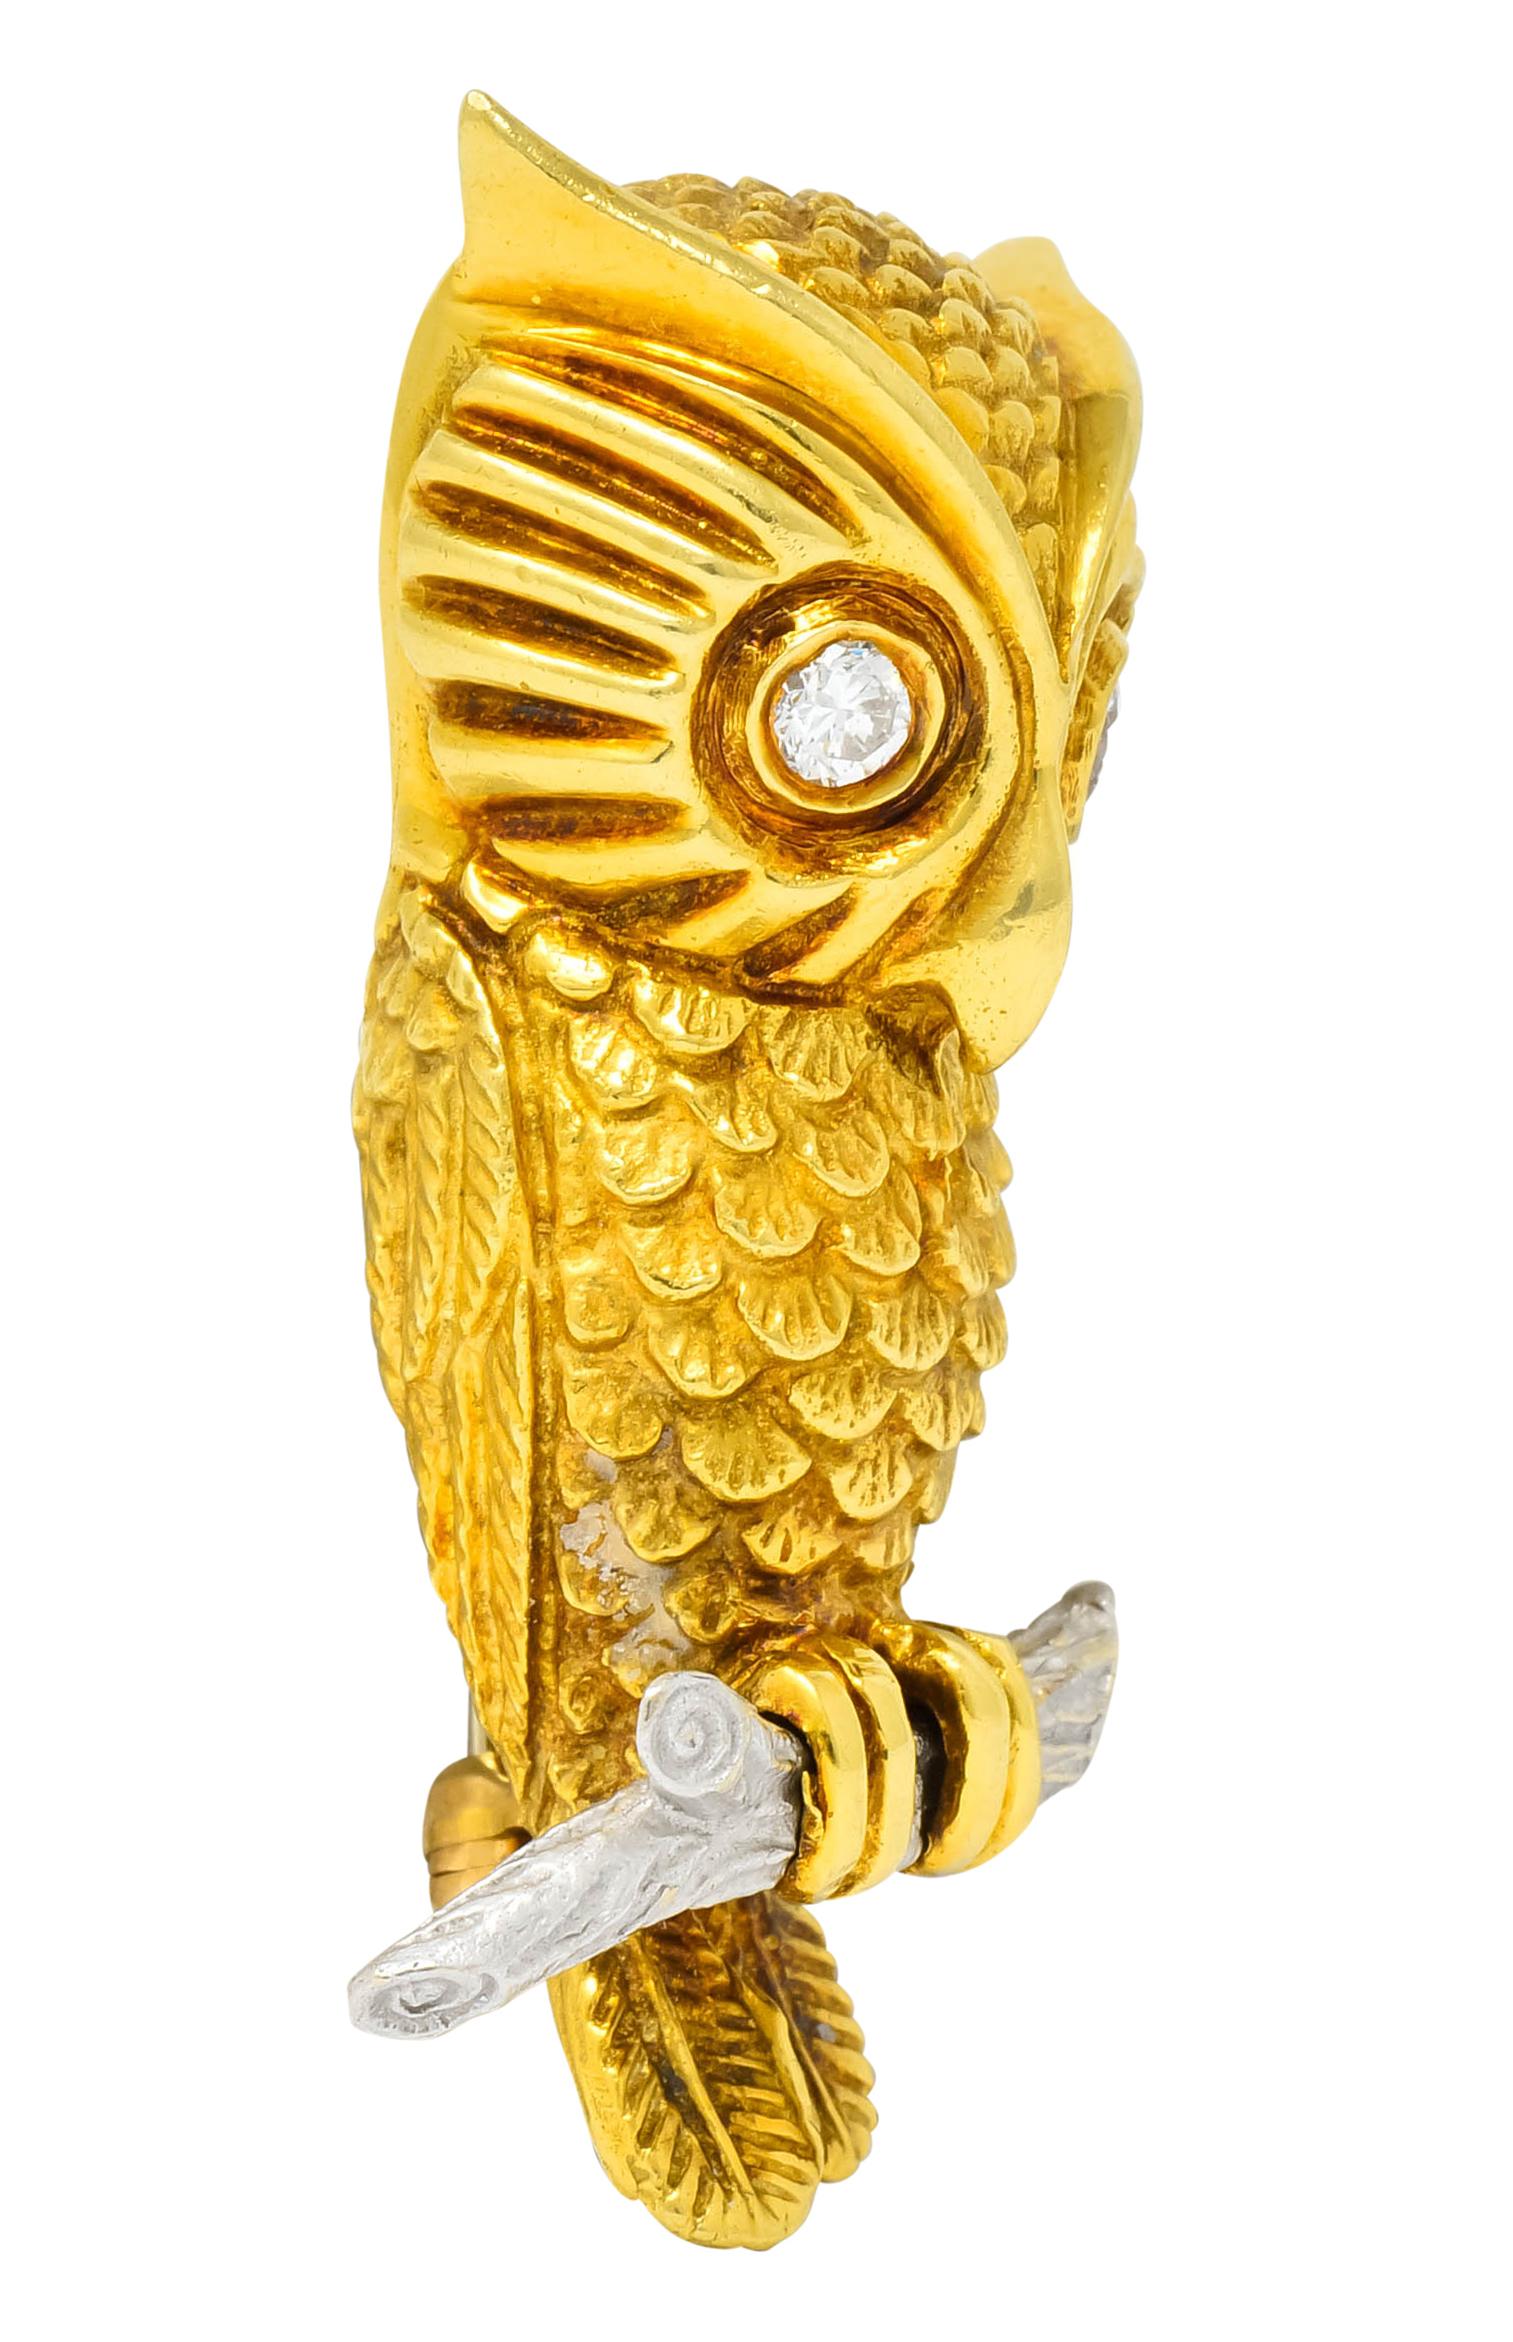 Brooch designed as a gold owl perched on a platinum branch with highly rendered feathers and detailed bark

Eyes are bezel set by two round brilliant cut diamonds weighing approximately 0.24 carat; G color and VS clarity

Completed by 14 karat gold